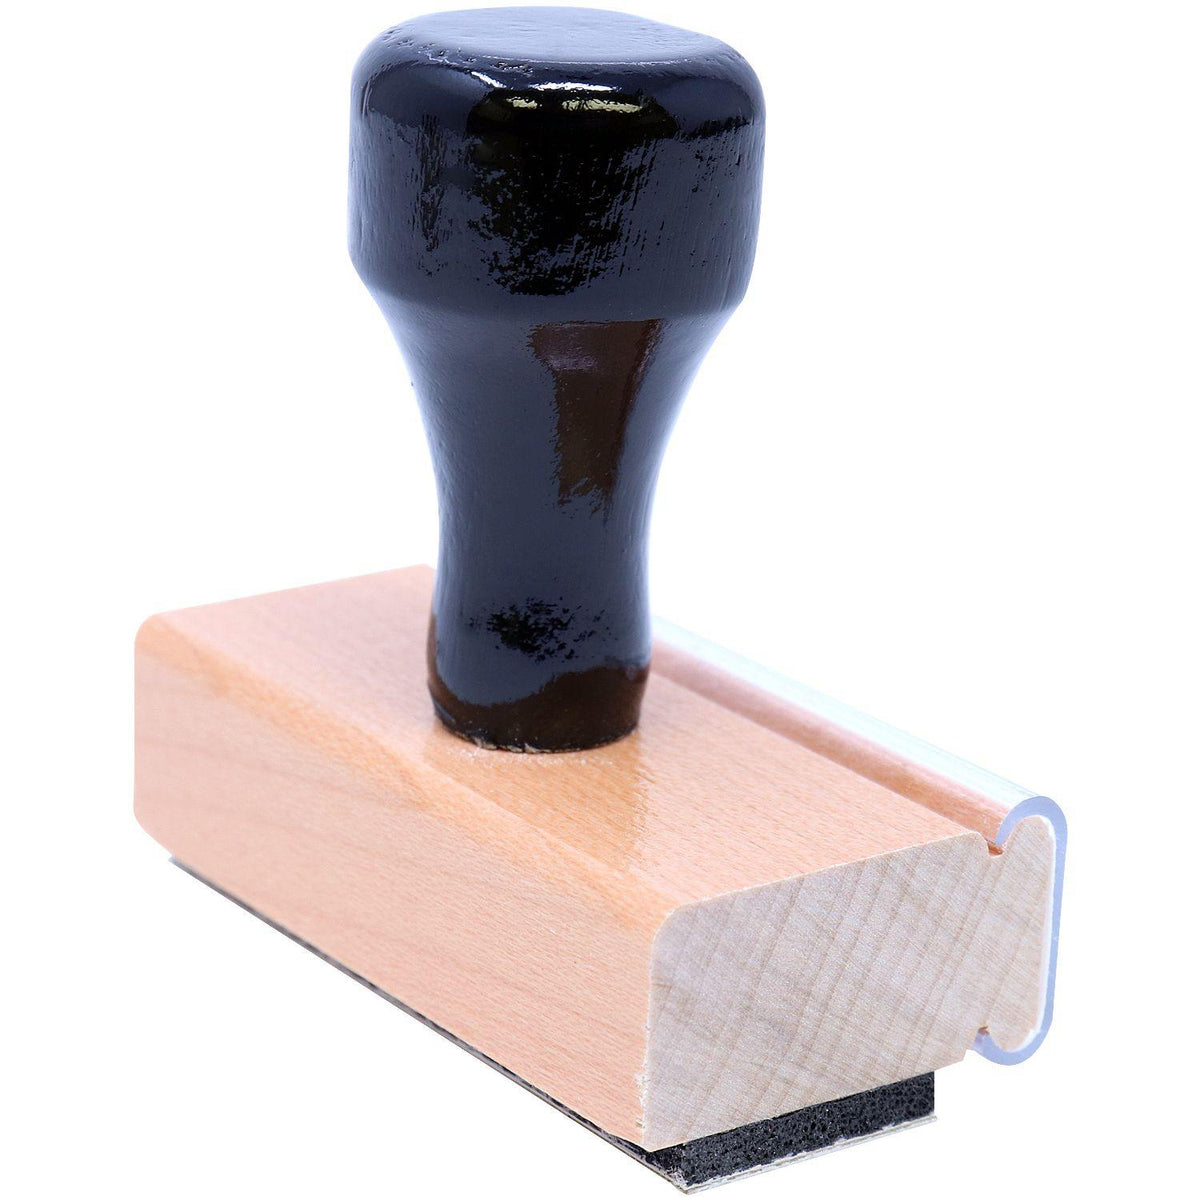 Large Shred Rubber Stamp - Engineer Seal Stamps - Brand_Acorn, Impression Size_Large, Stamp Type_Regular Stamp, Type of Use_Office